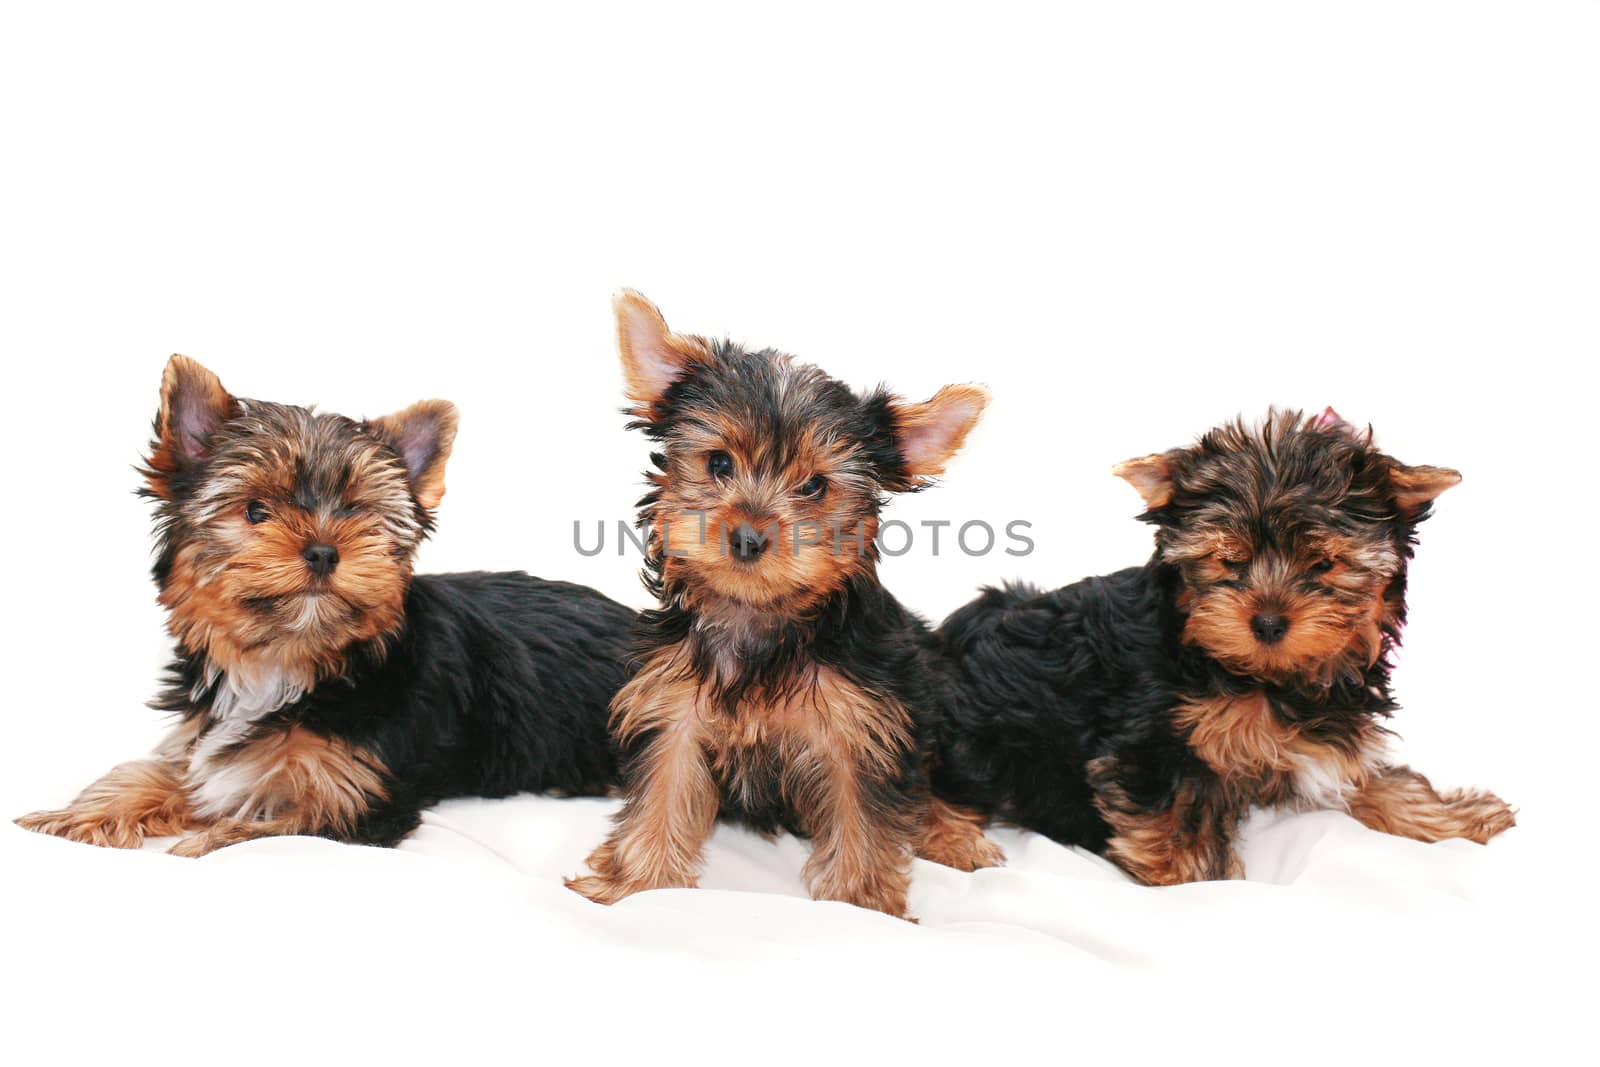 Puppies of yorkshire  terrier on  white background by yurii_bizgaimer